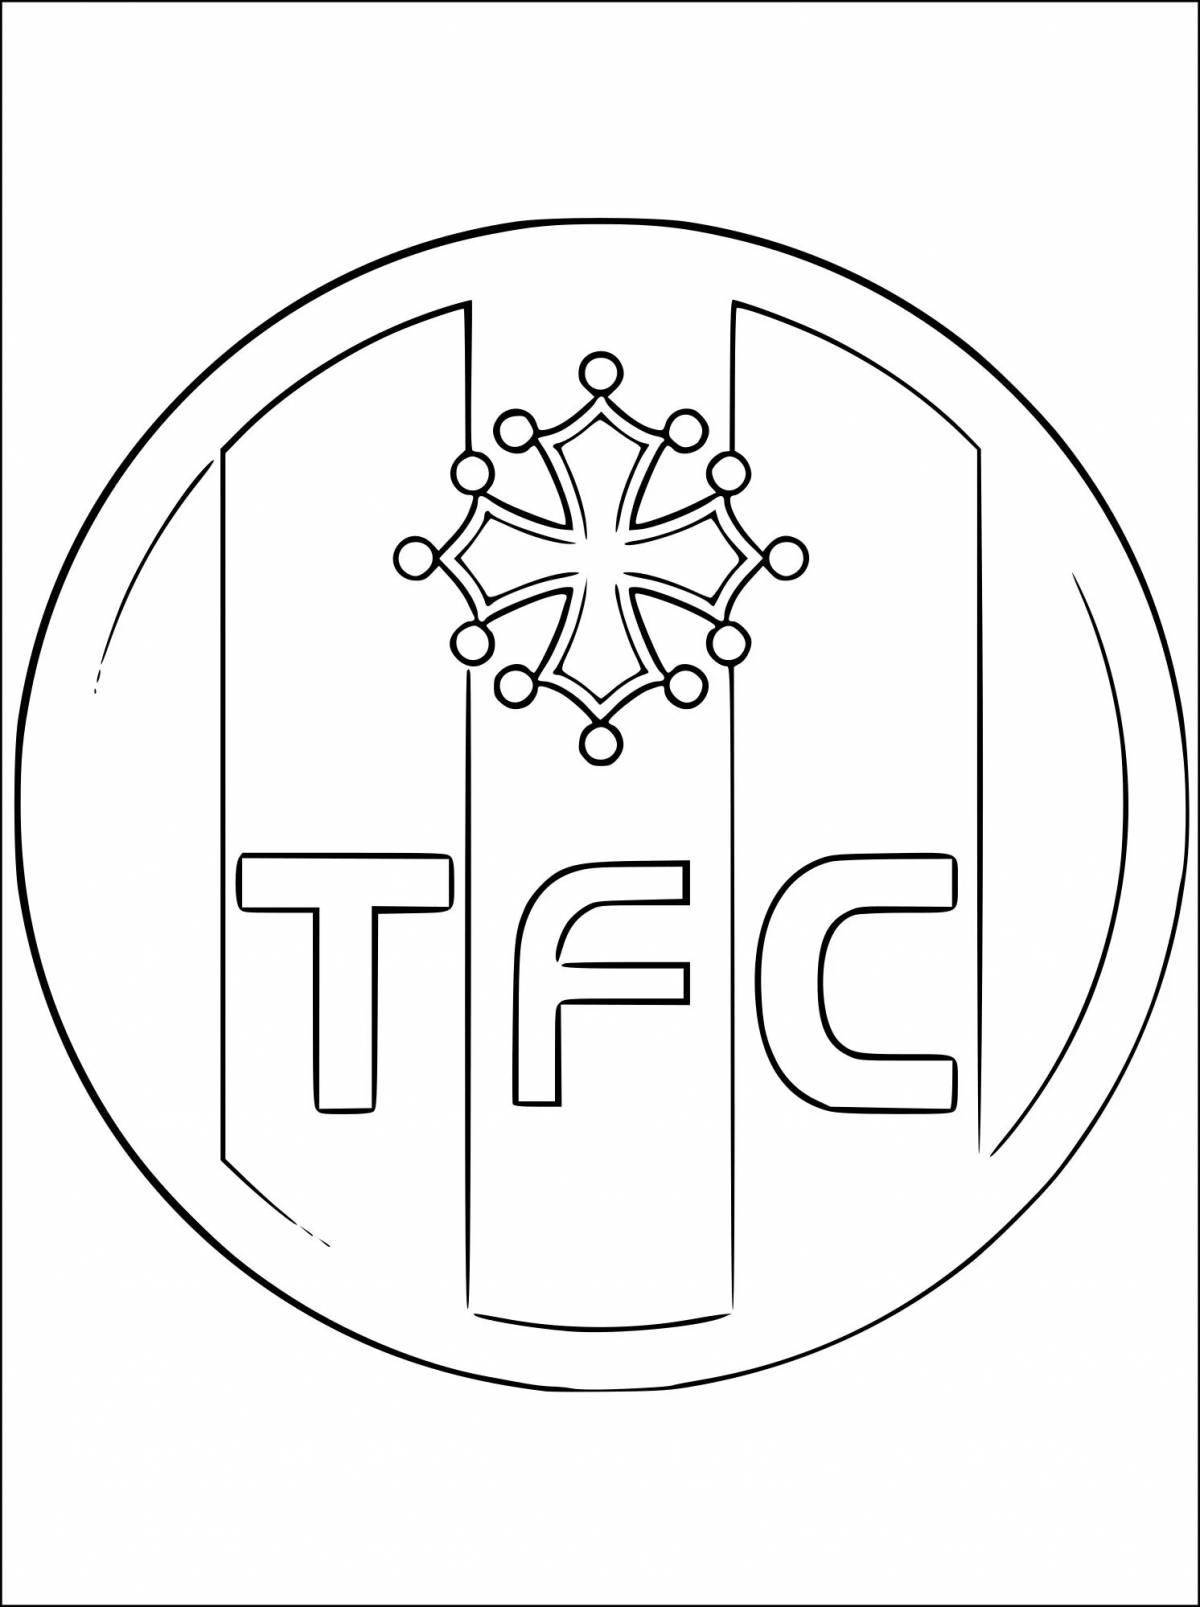 Awesome psg icon coloring page